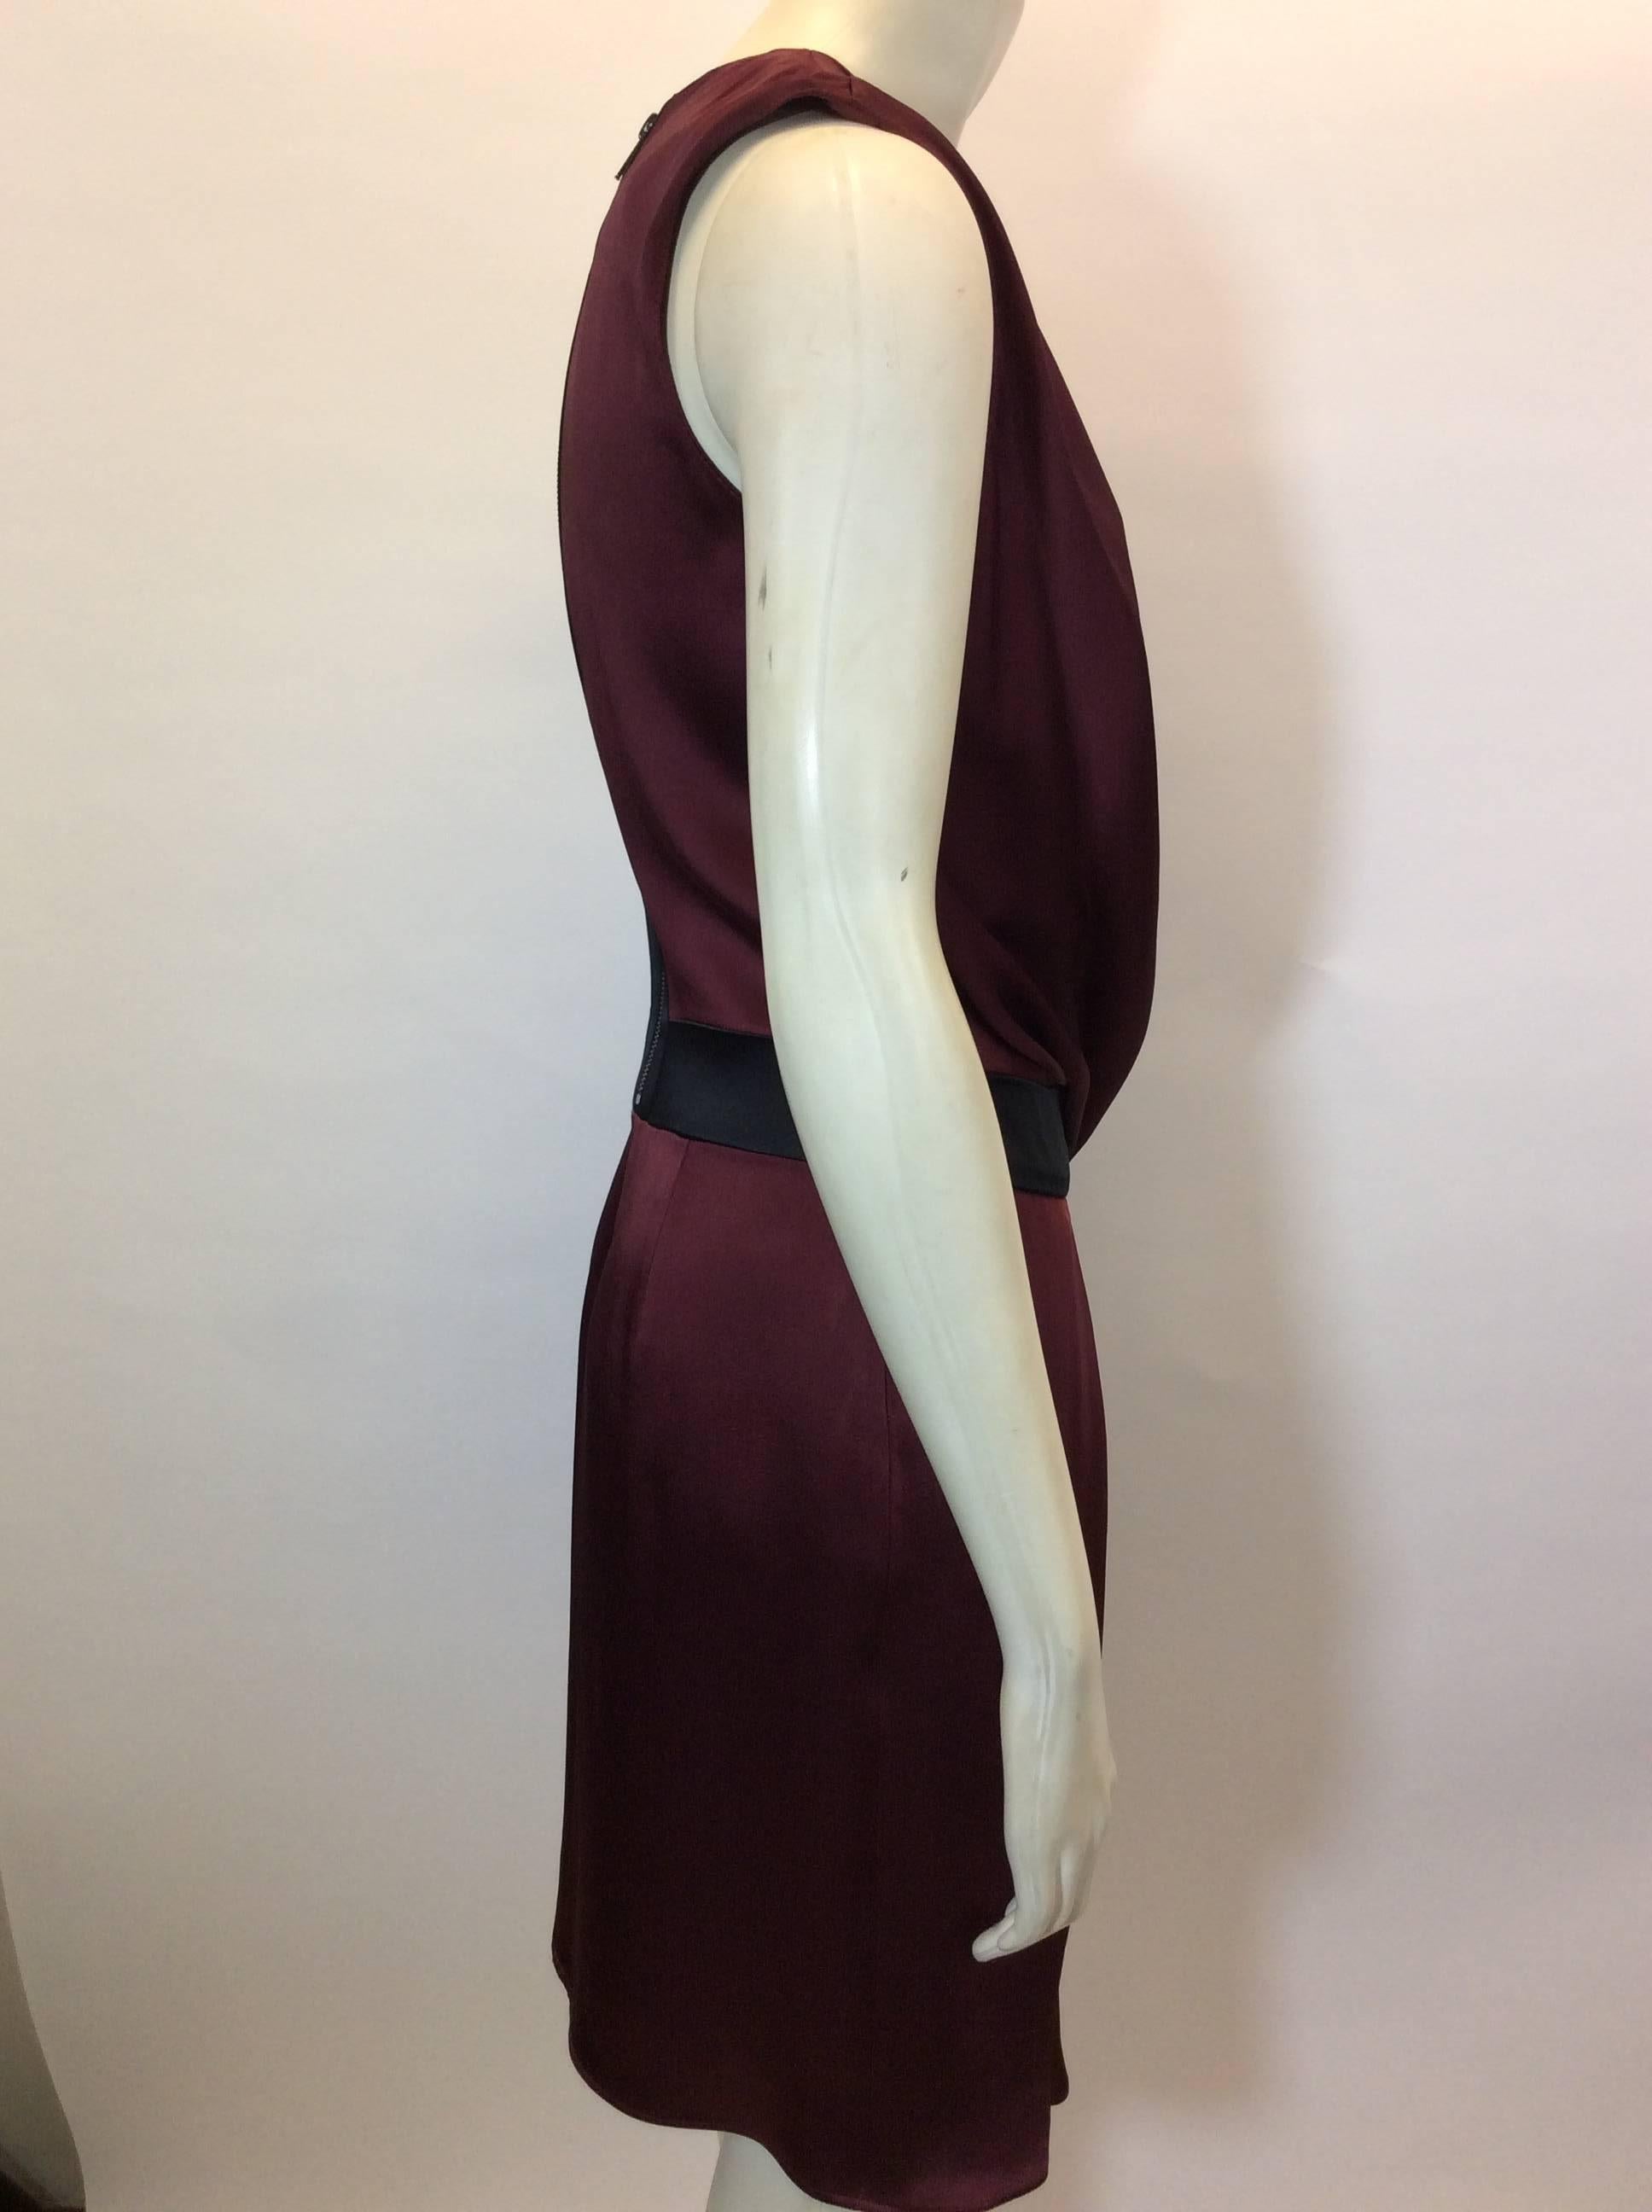 Helmut Lang Burgundy Draped Dress with Black Drop Waist Detail In New Condition For Sale In Narberth, PA